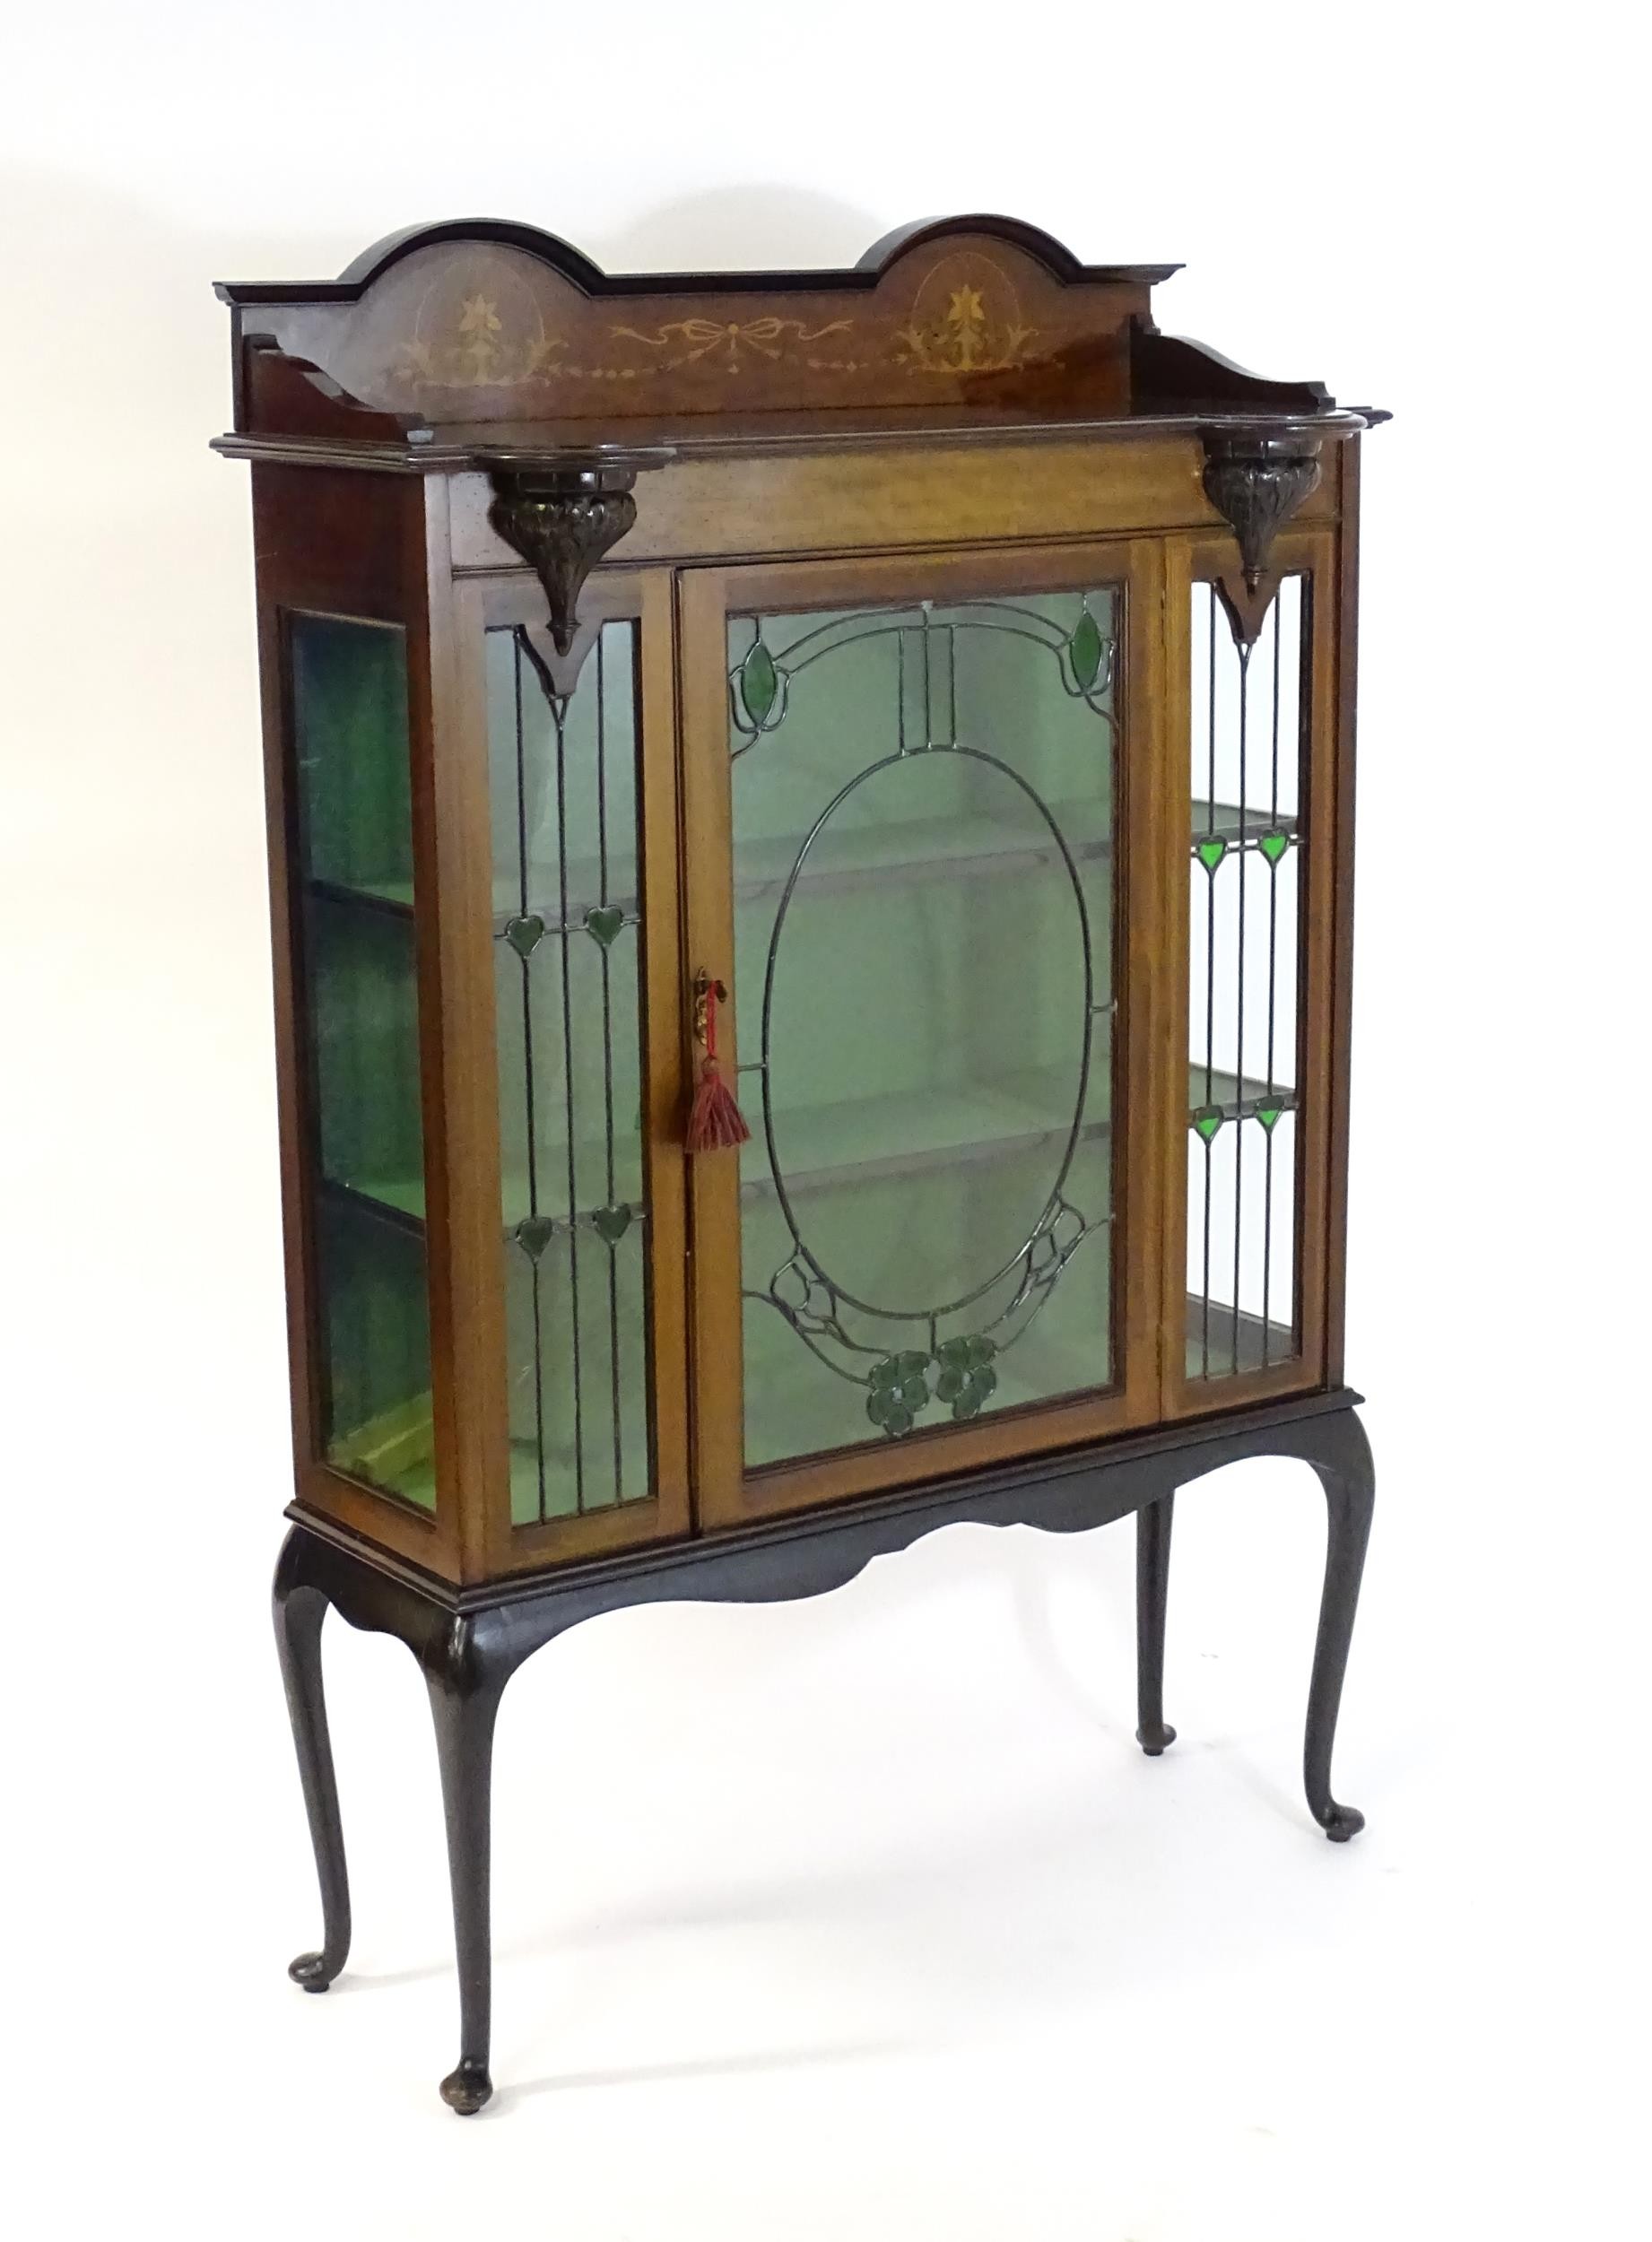 An Edwardian mahogany display cabinet with leaded glass panelling, stained glass panels and a